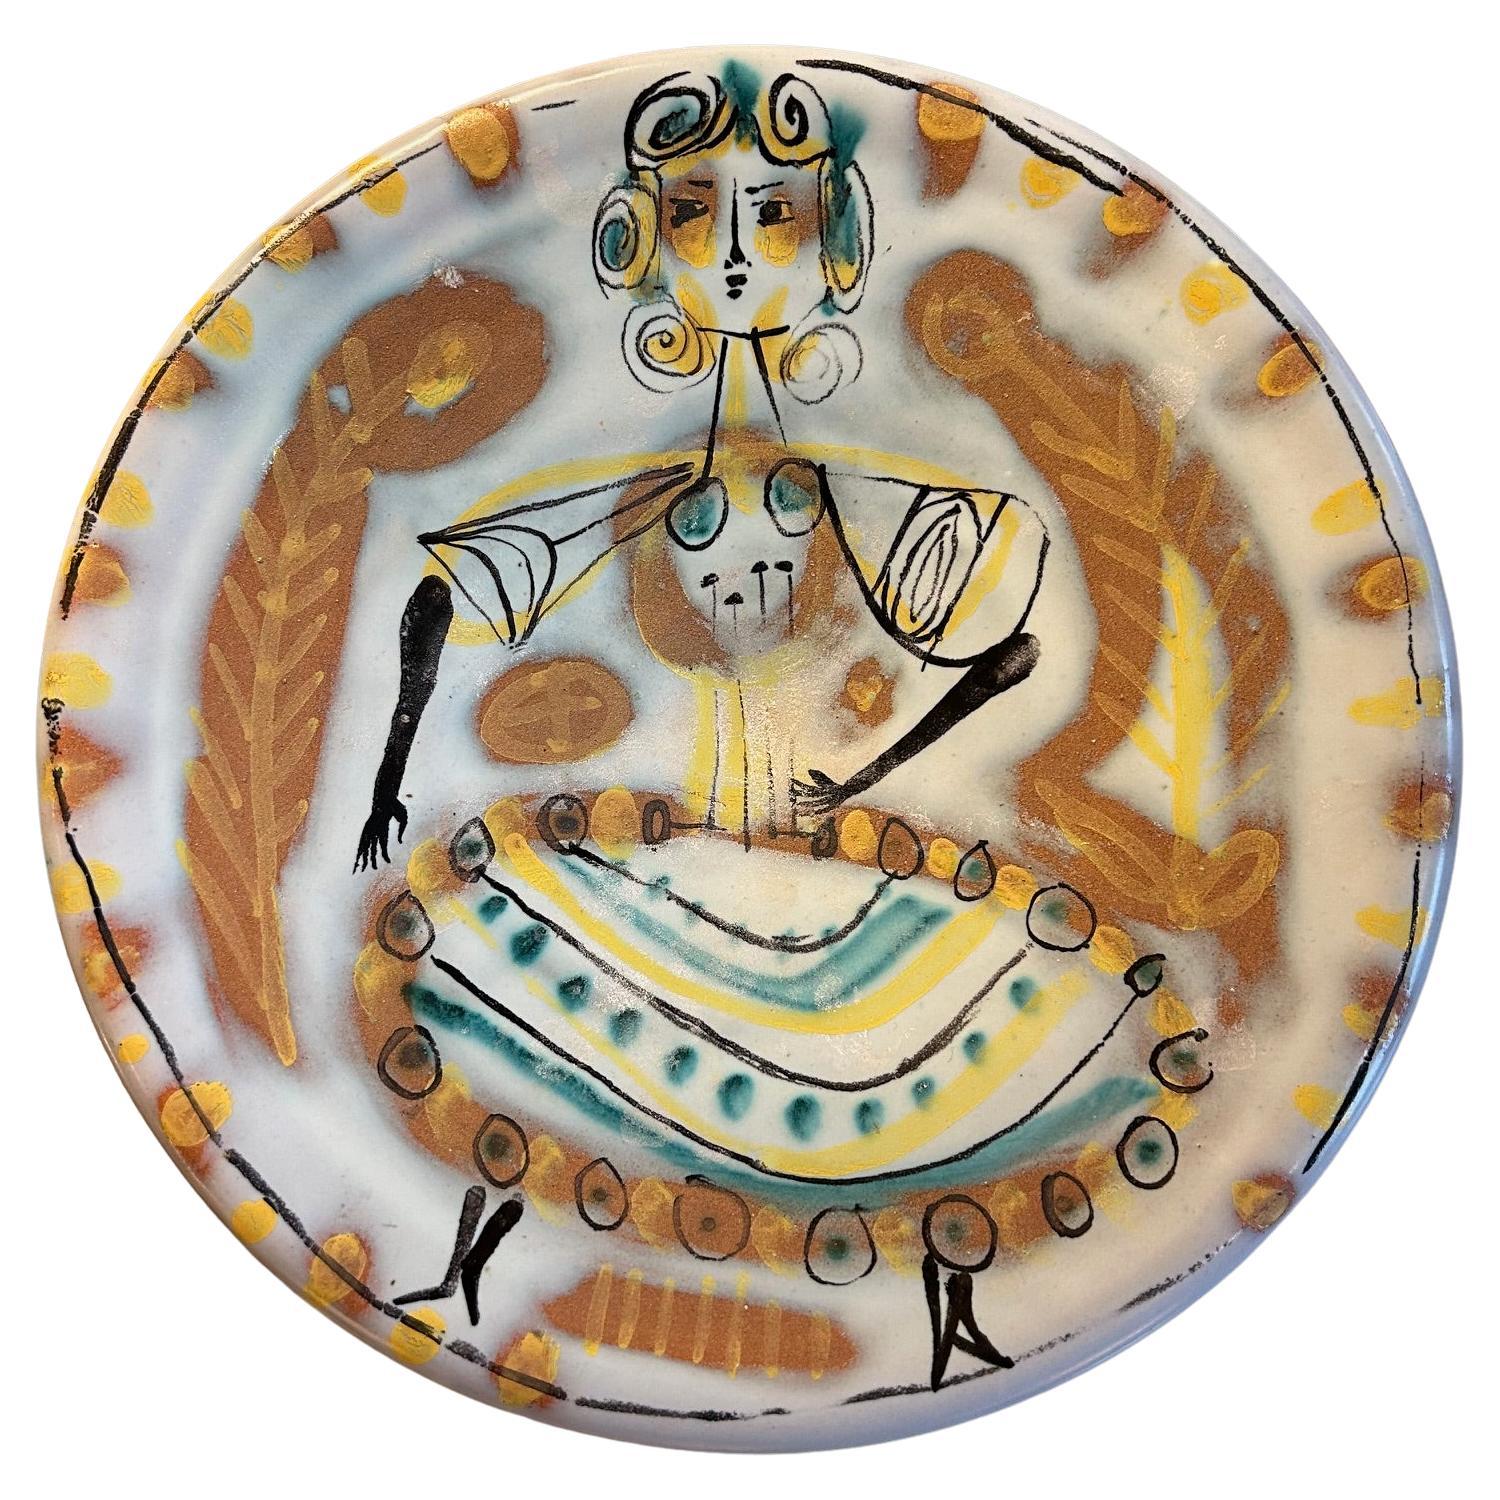 Ceramic plate by Roger Capron, France, 1960's